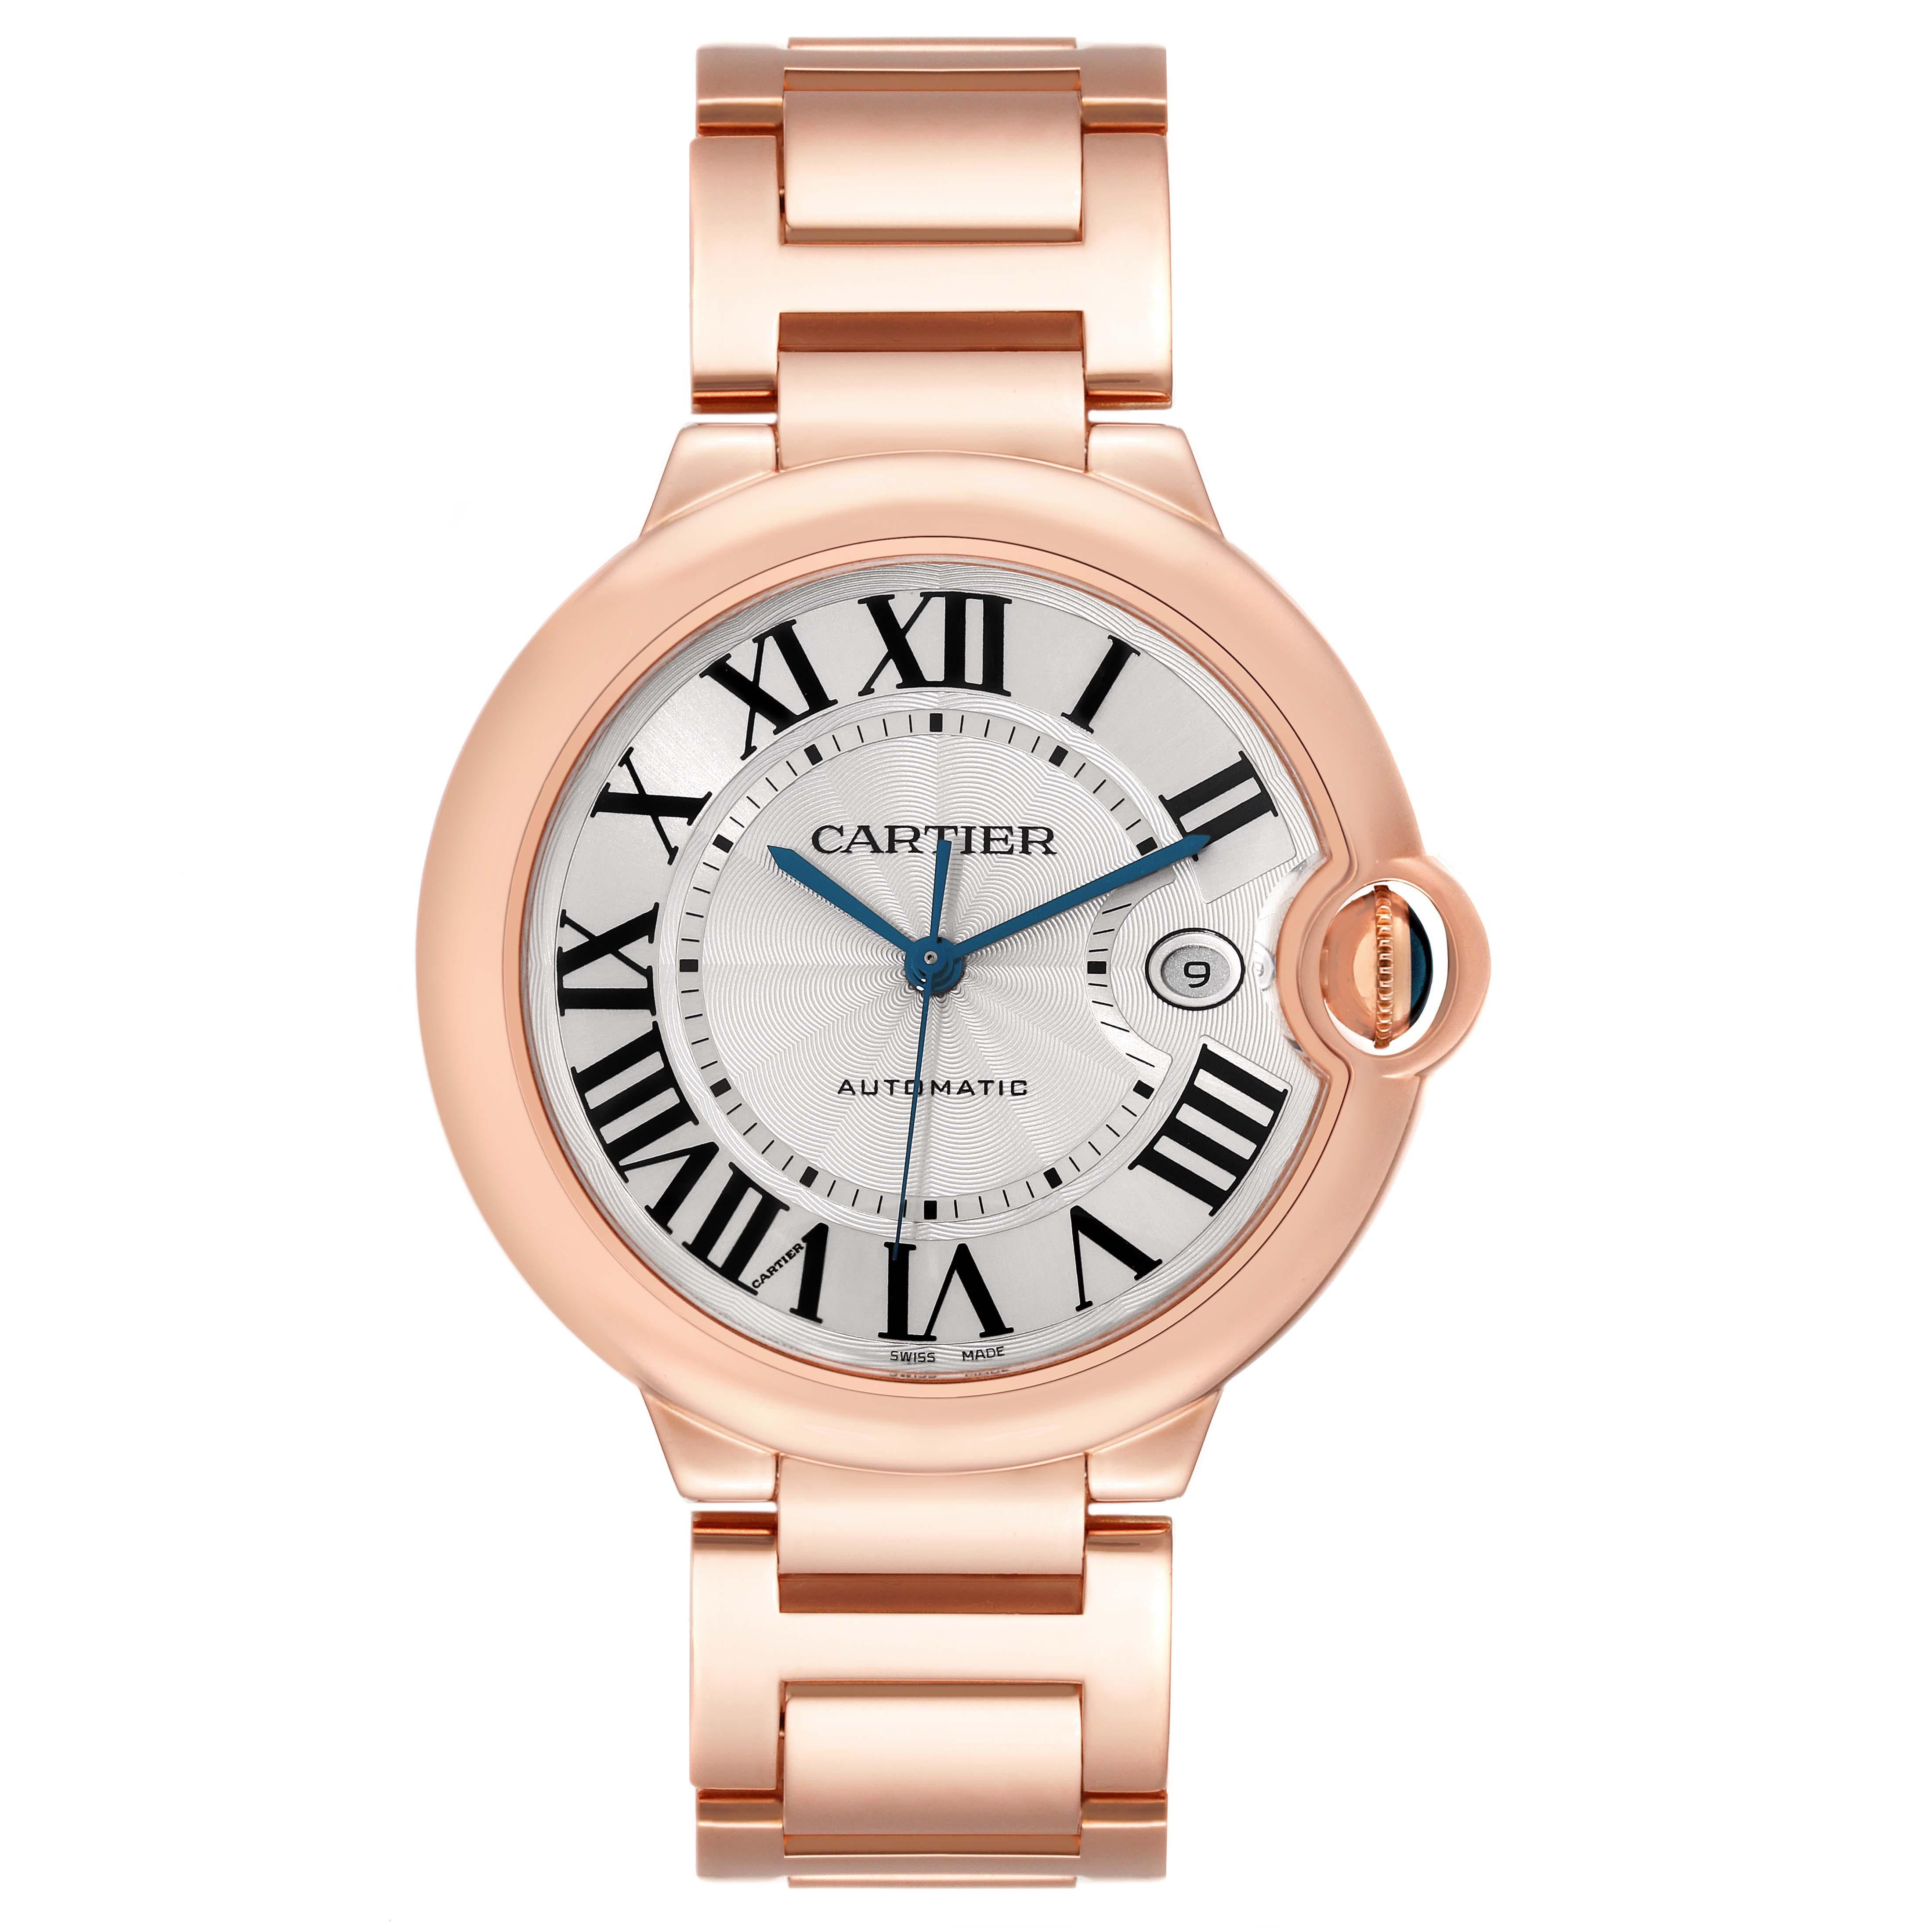 Cartier Ballon Bleu 42mm Rose Gold Automatic Mens Watch W69006Z2 Box Papers. Automatic self-winding movement. 18K rose gold case 42.0 mm in diameter. Fluted crown set with the blue sapphire cabochon. 18K rose gold smooth bezel. Scratch resistant